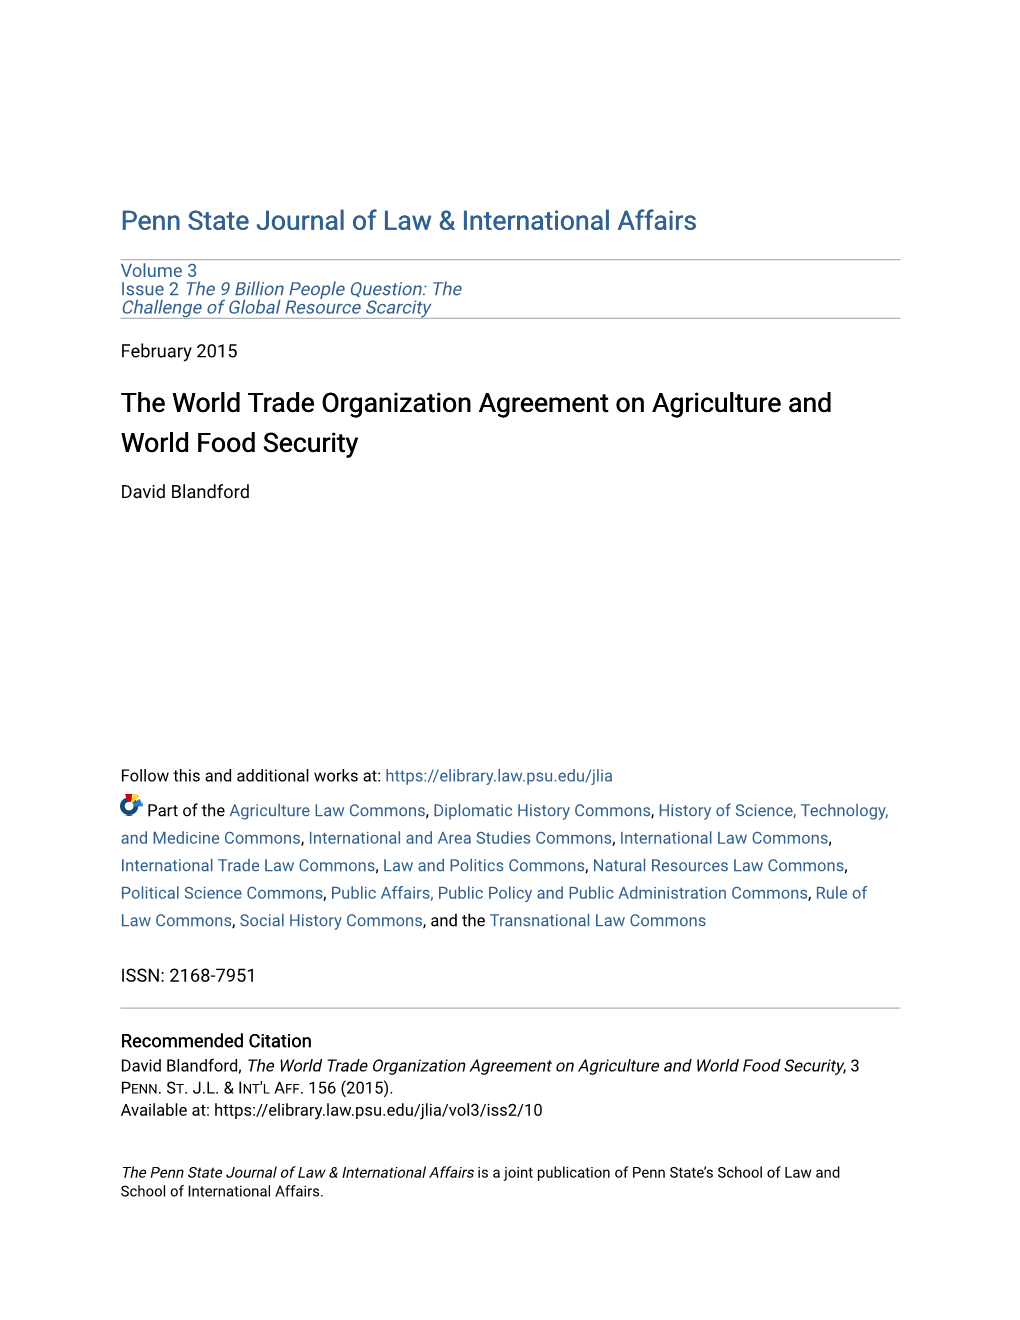 The World Trade Organization Agreement on Agriculture and World Food Security